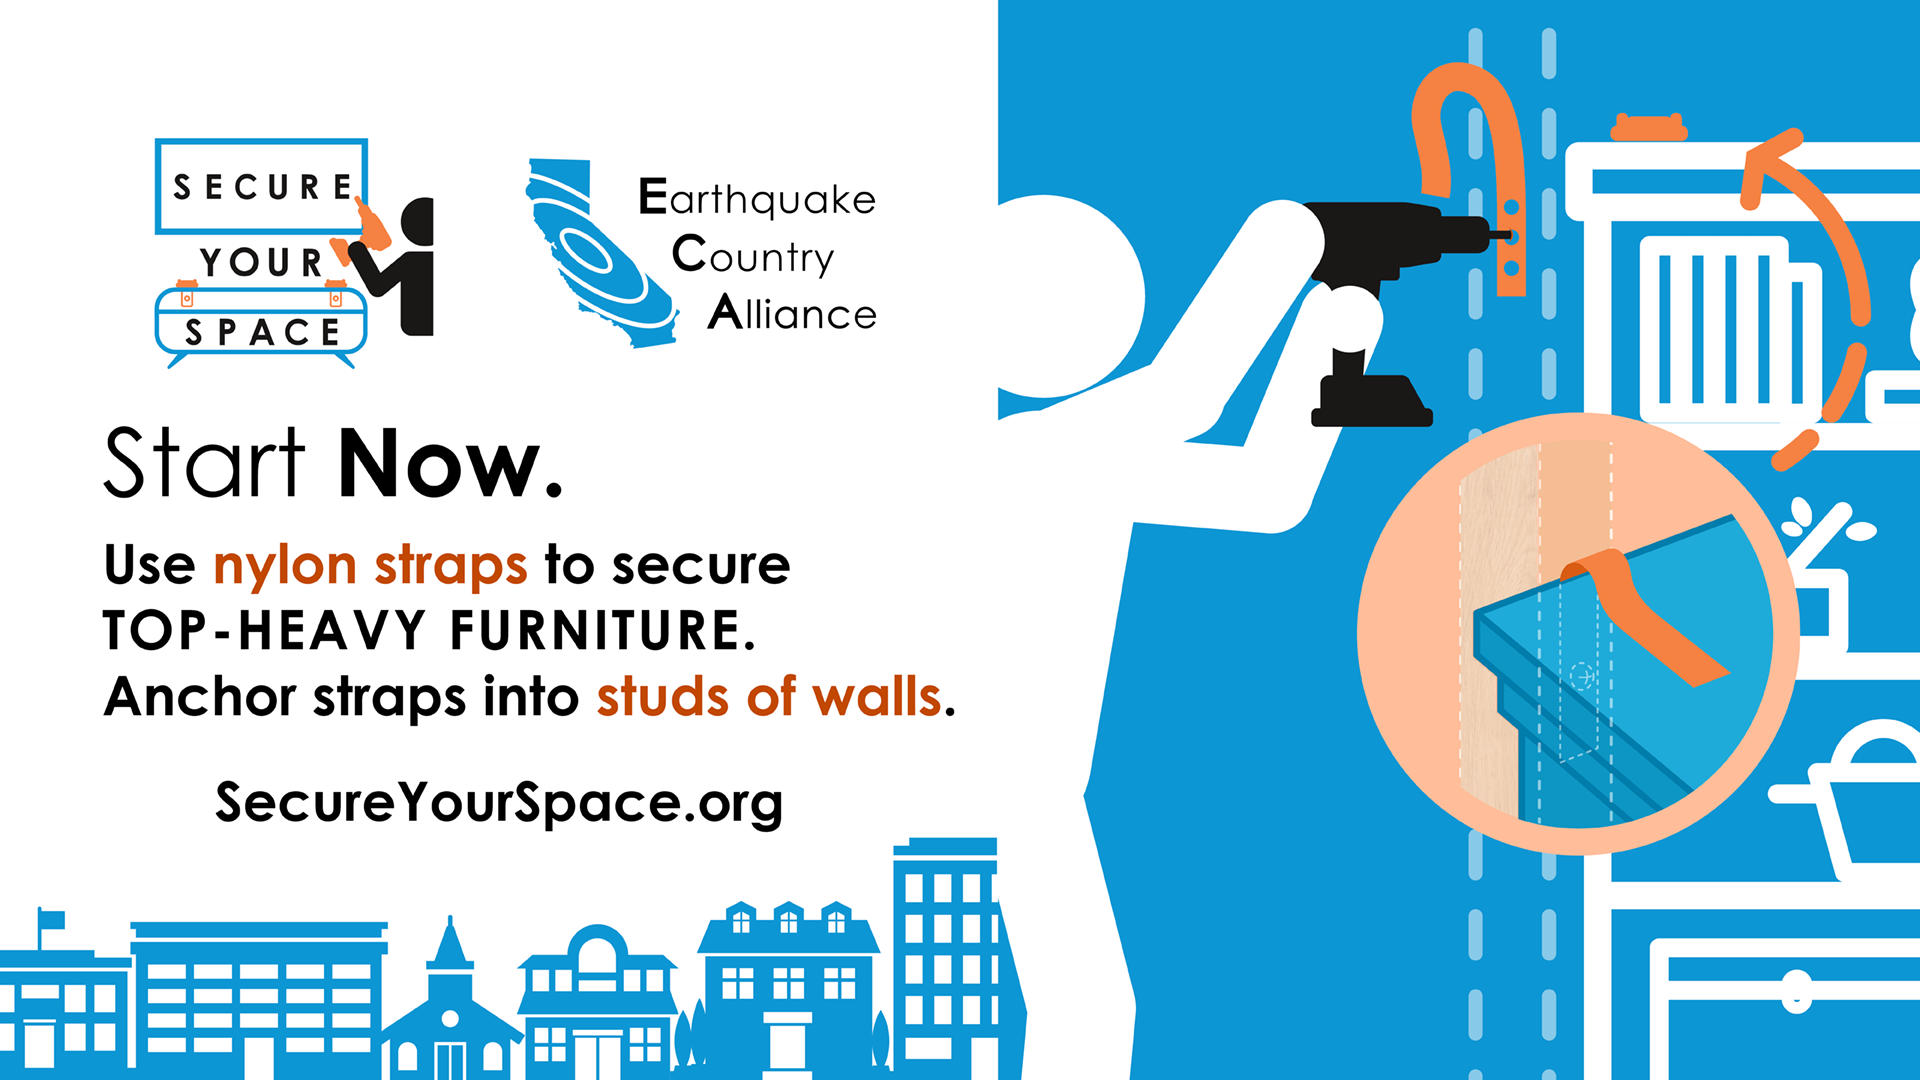 Graphic showing how to secure bookcases for earthquake shaking with nylon straps, and promoting SecureYourSpace.org.